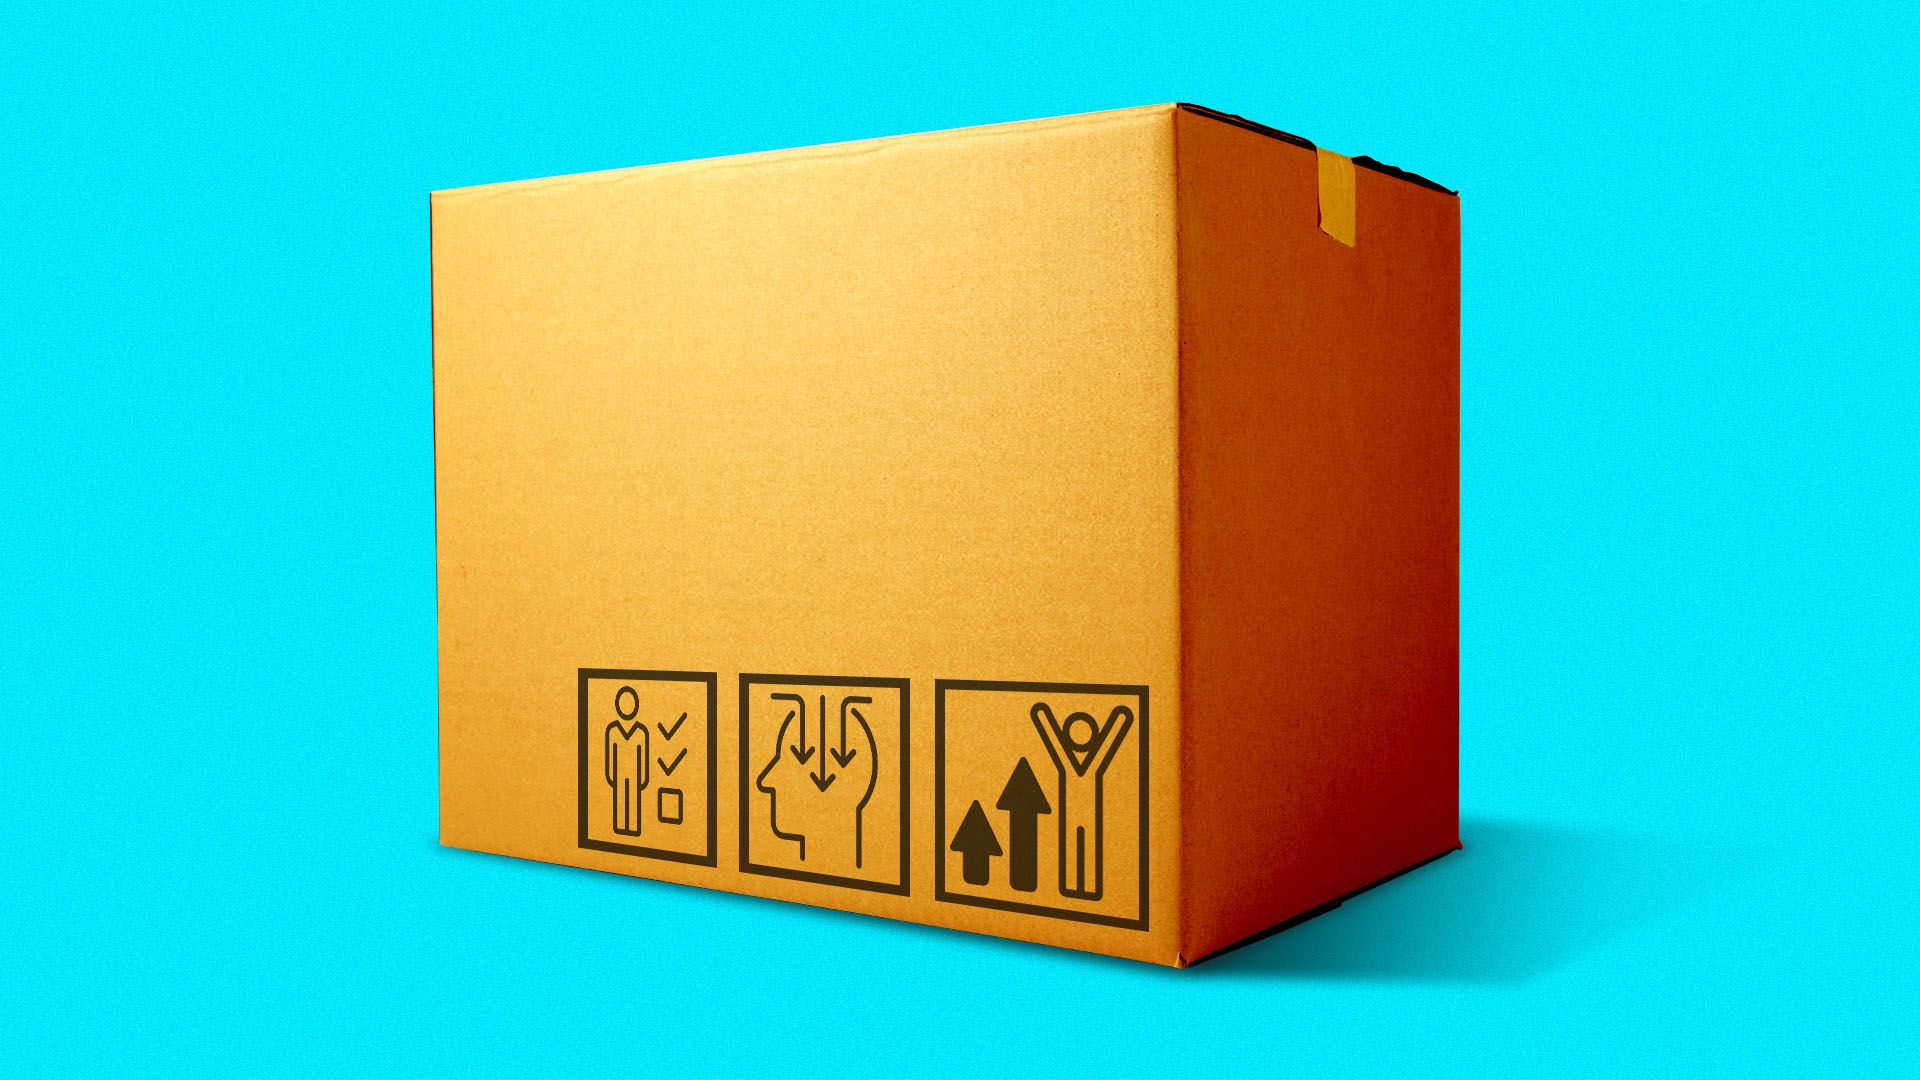 Illustration of a cardboard delivery box with icons related to improving worker skills on the side